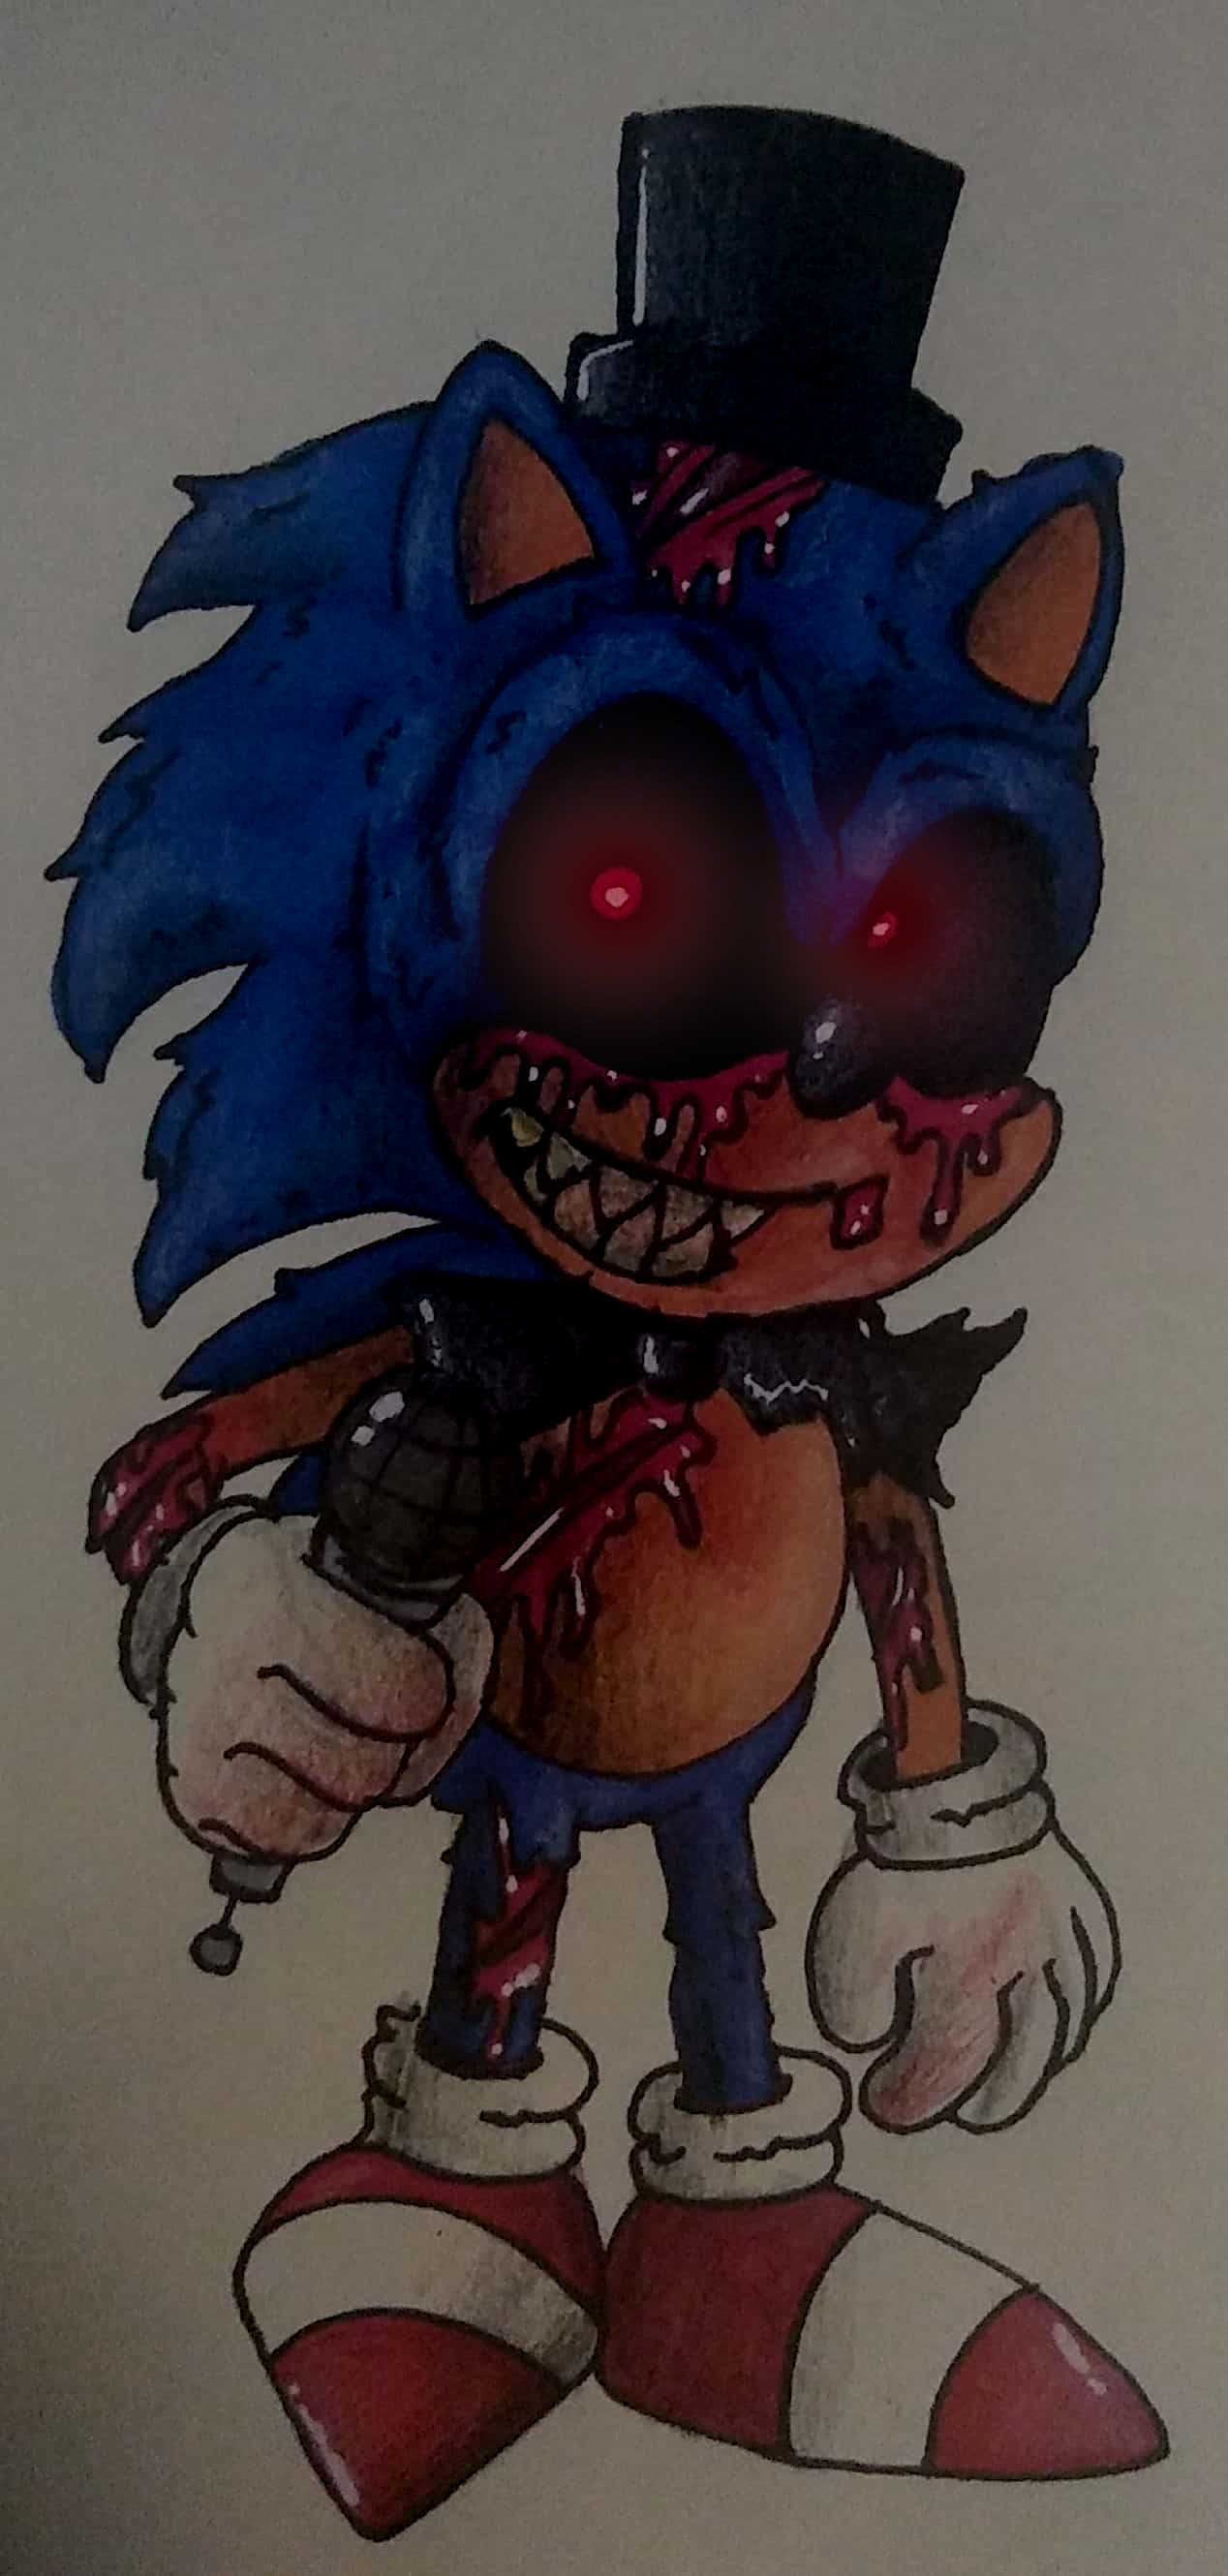 Sonic.exe (Sonic 2011) by AnxiousAlex2004 on DeviantArt